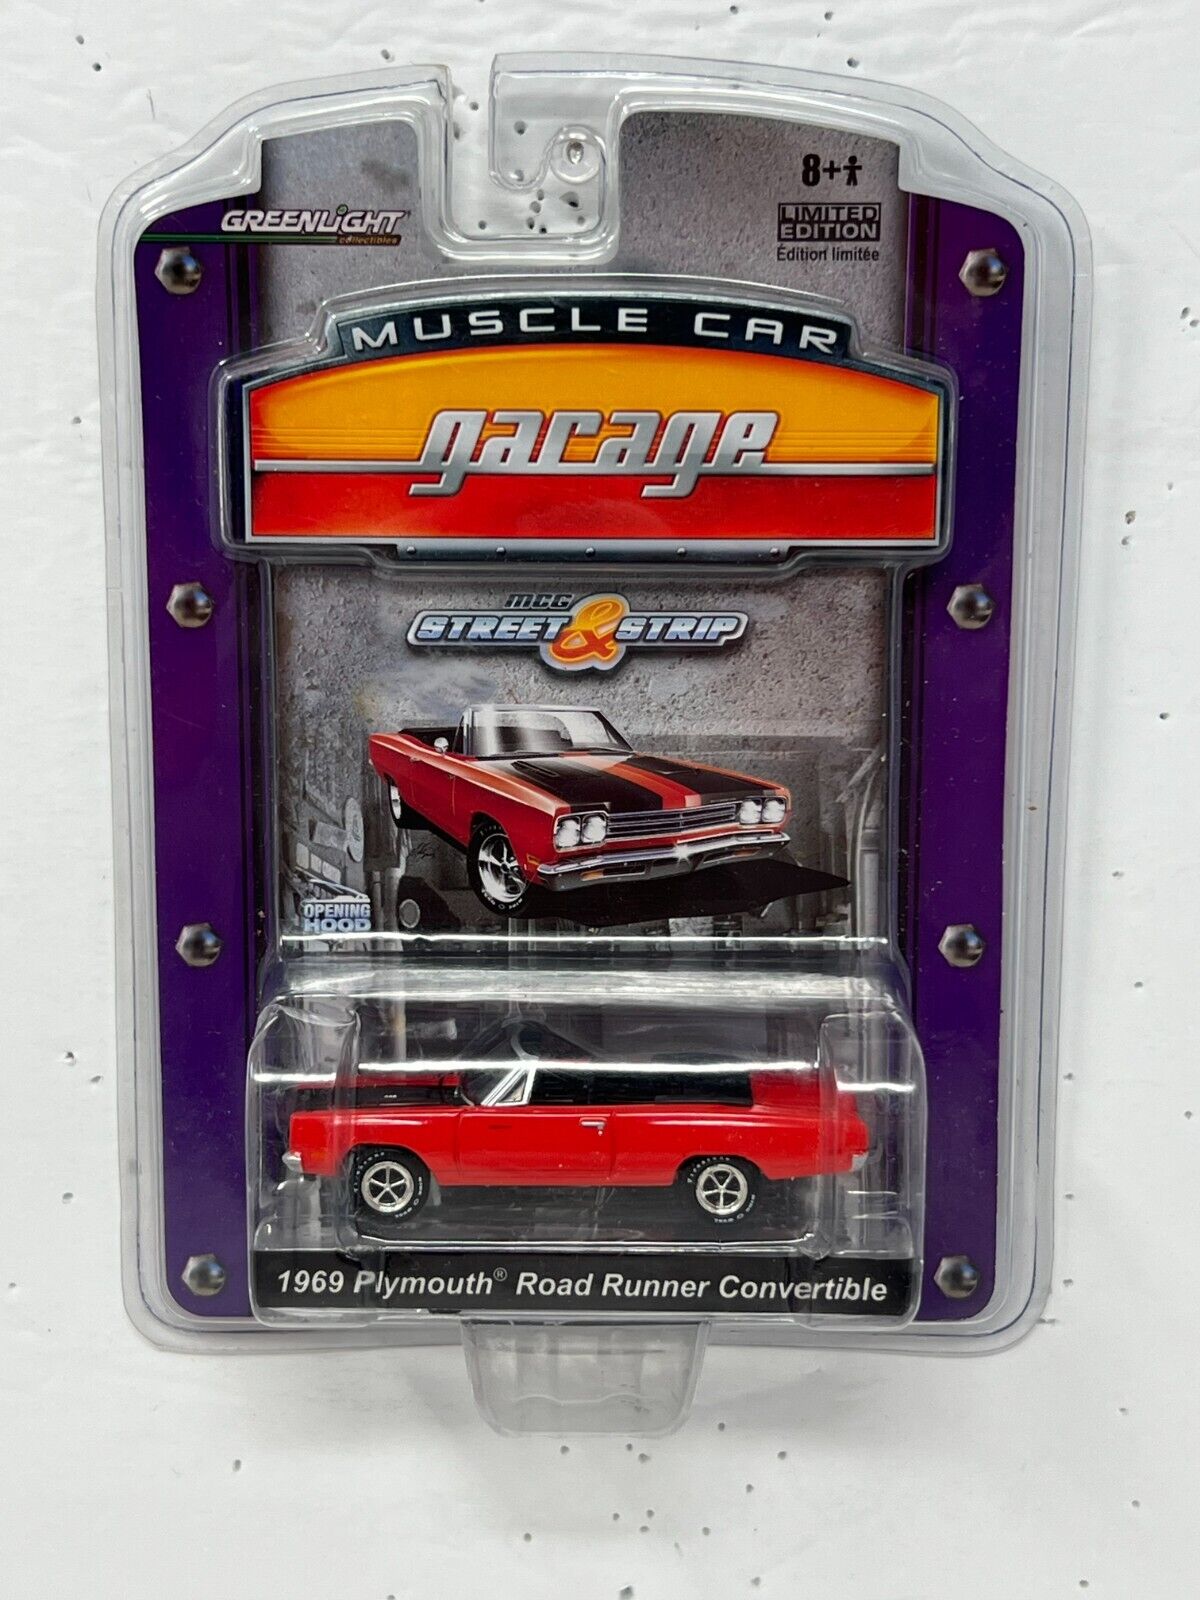 Greenlight Muscle Car Garage 1969 Plymouth Road Runner Convertible 1:64 Diecast